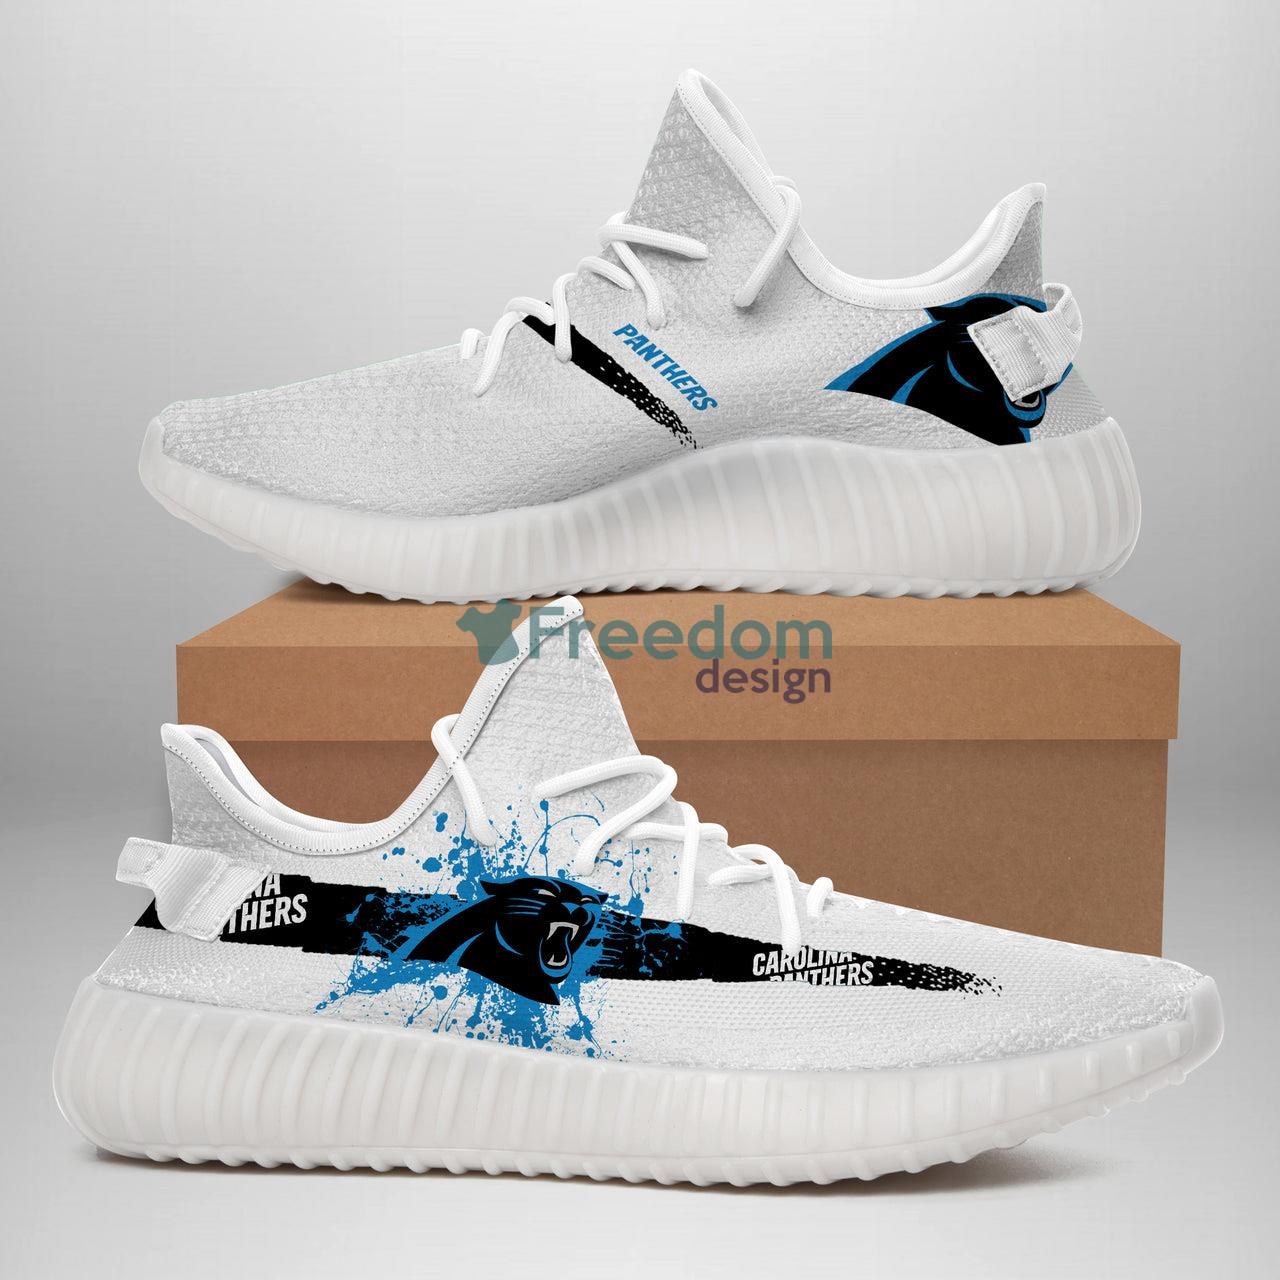 Carolina Panthers Team Sport Lover Yeezy Shoes Product Photo 1